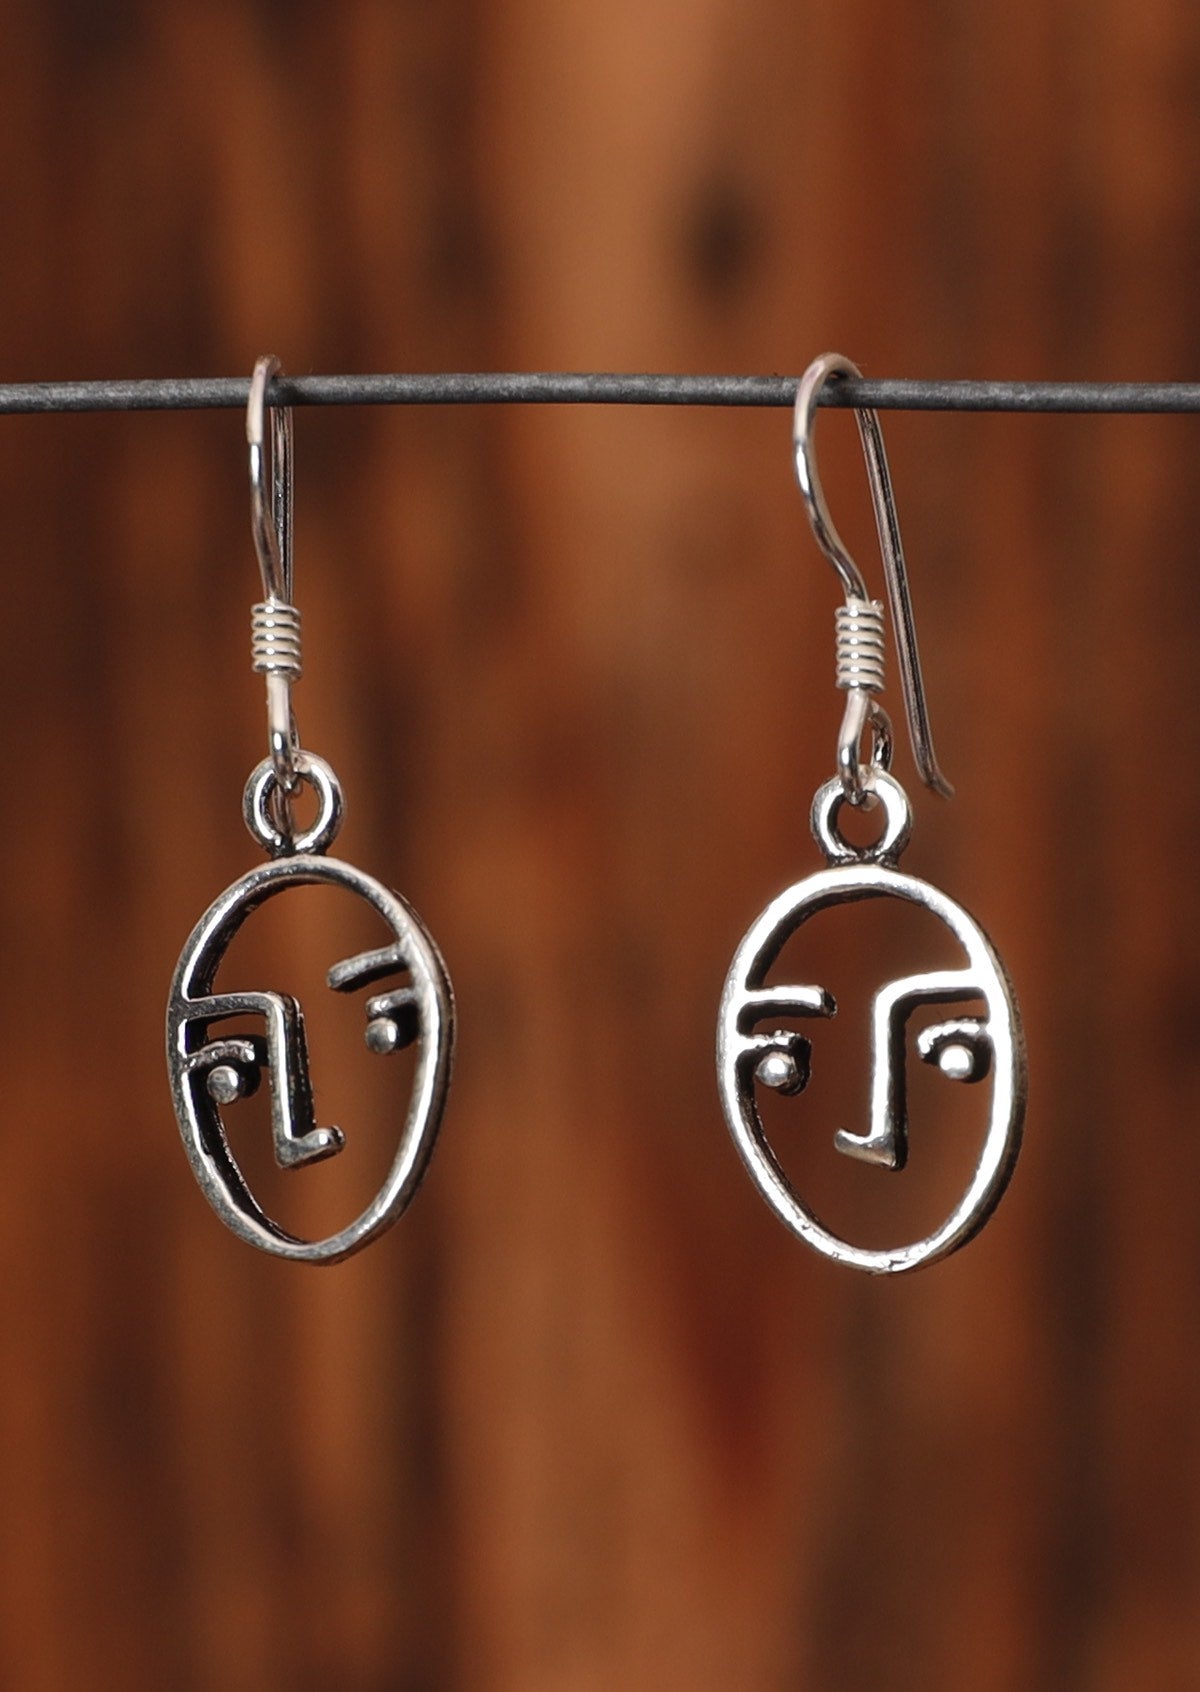 92.5% silver earrings with line drawn faces sitting on wire for display.